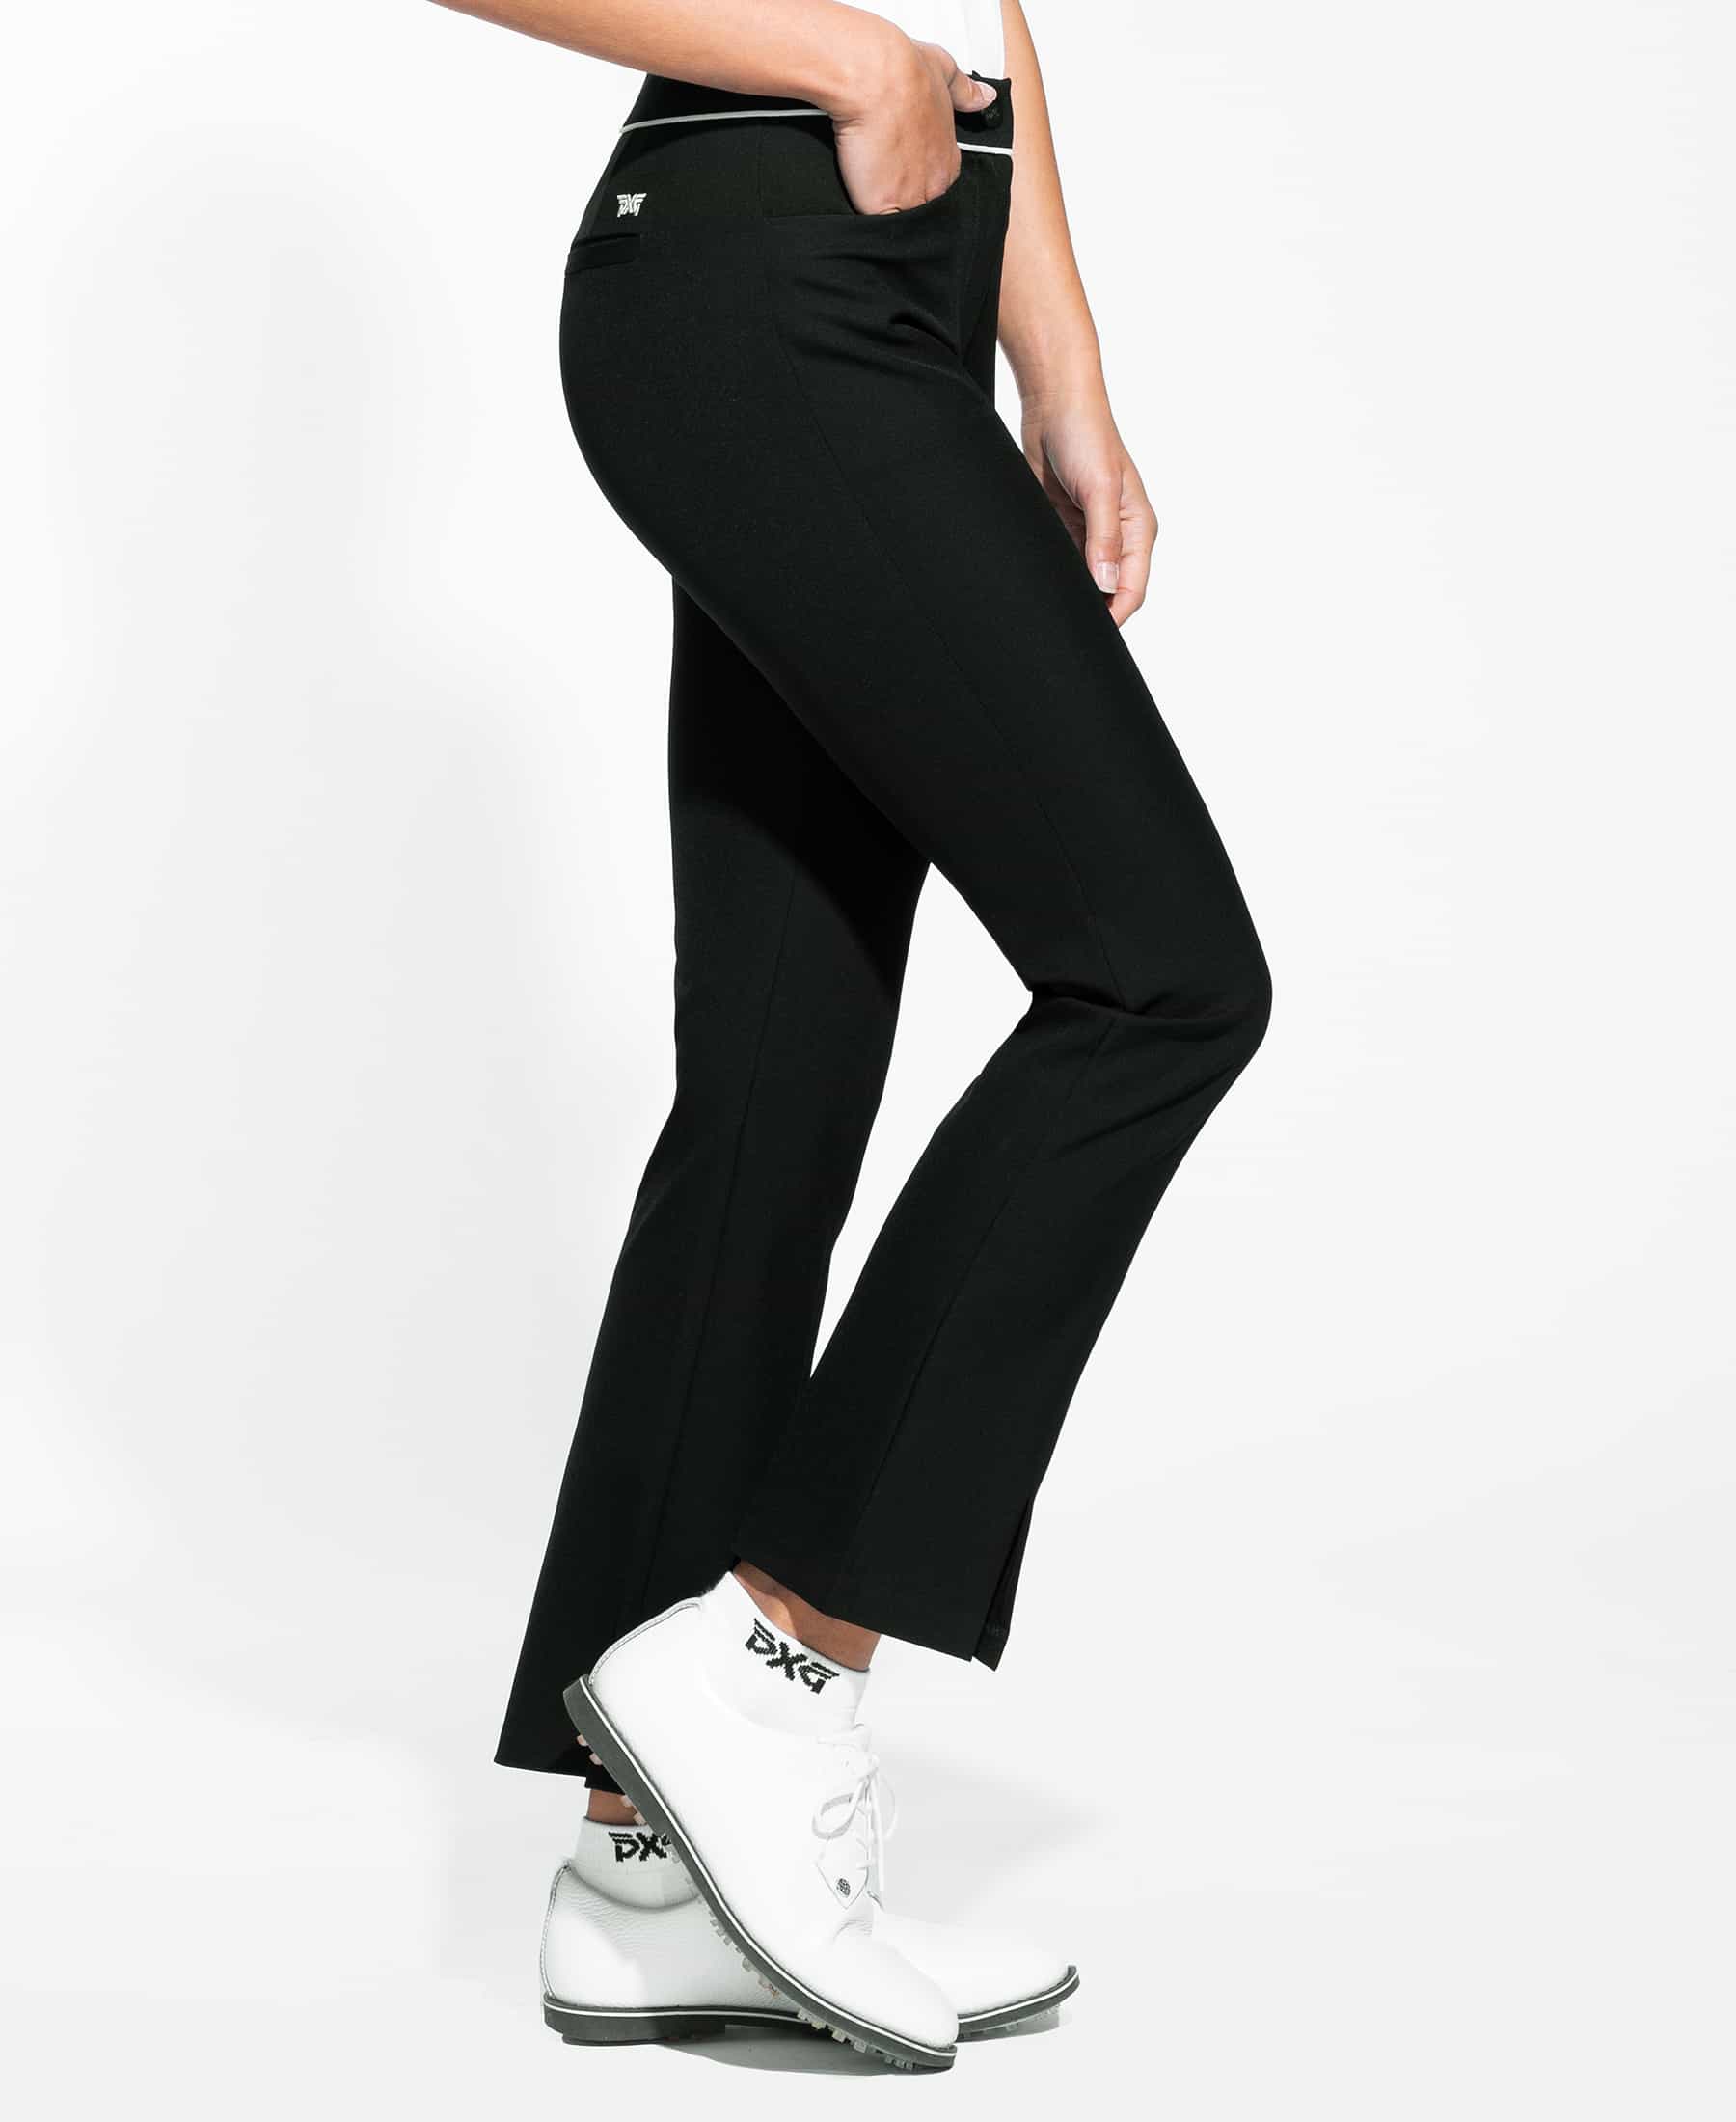 Women's Front Slit Golf Pants Black  Shop the Highest Quality Golf Apparel,  Gear, Accessories and Golf Clubs at PXG